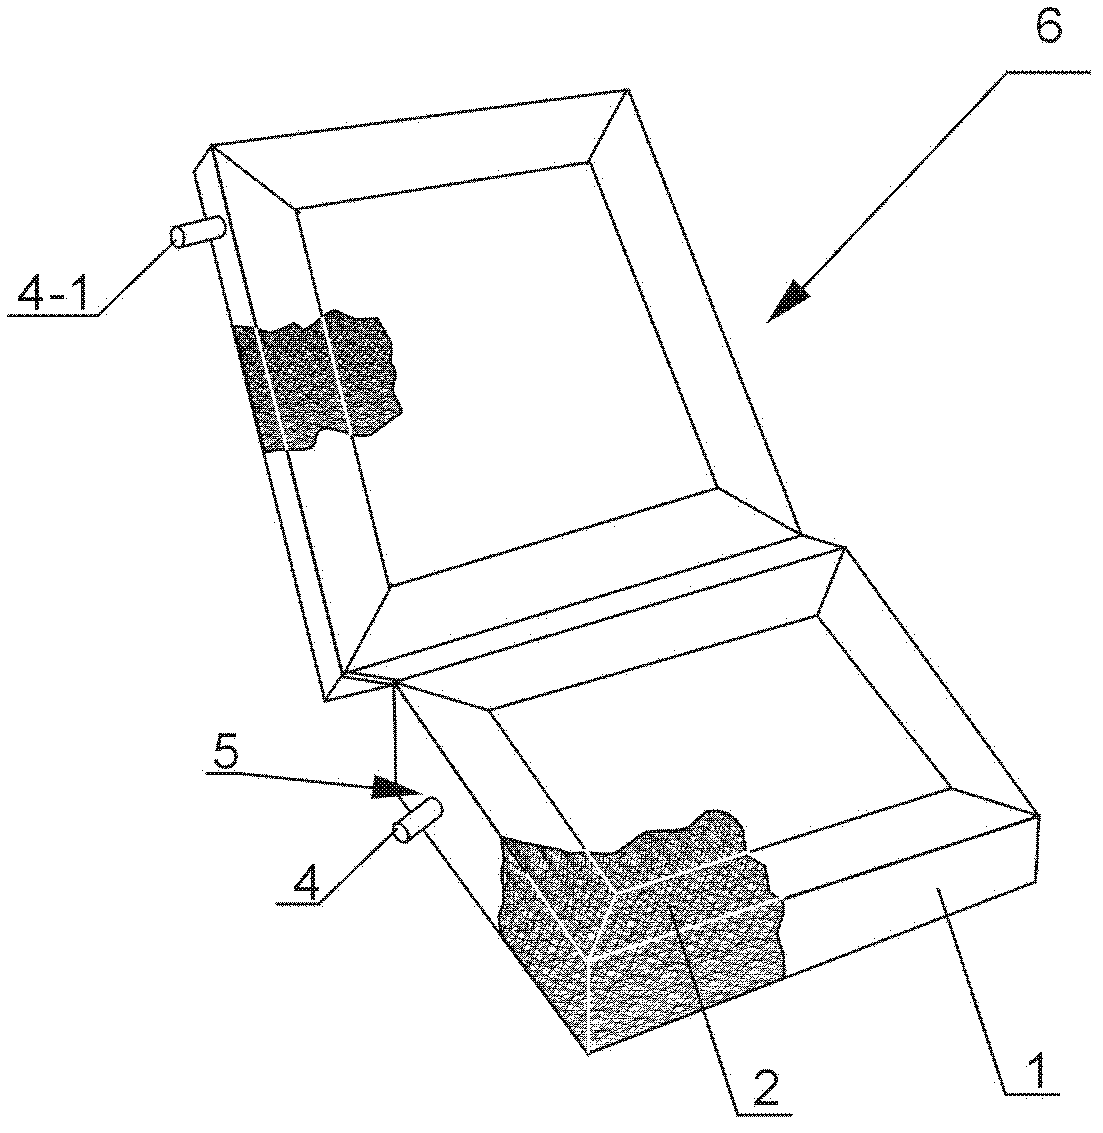 Manufacturing method and structure of metal wire ball seat cushion